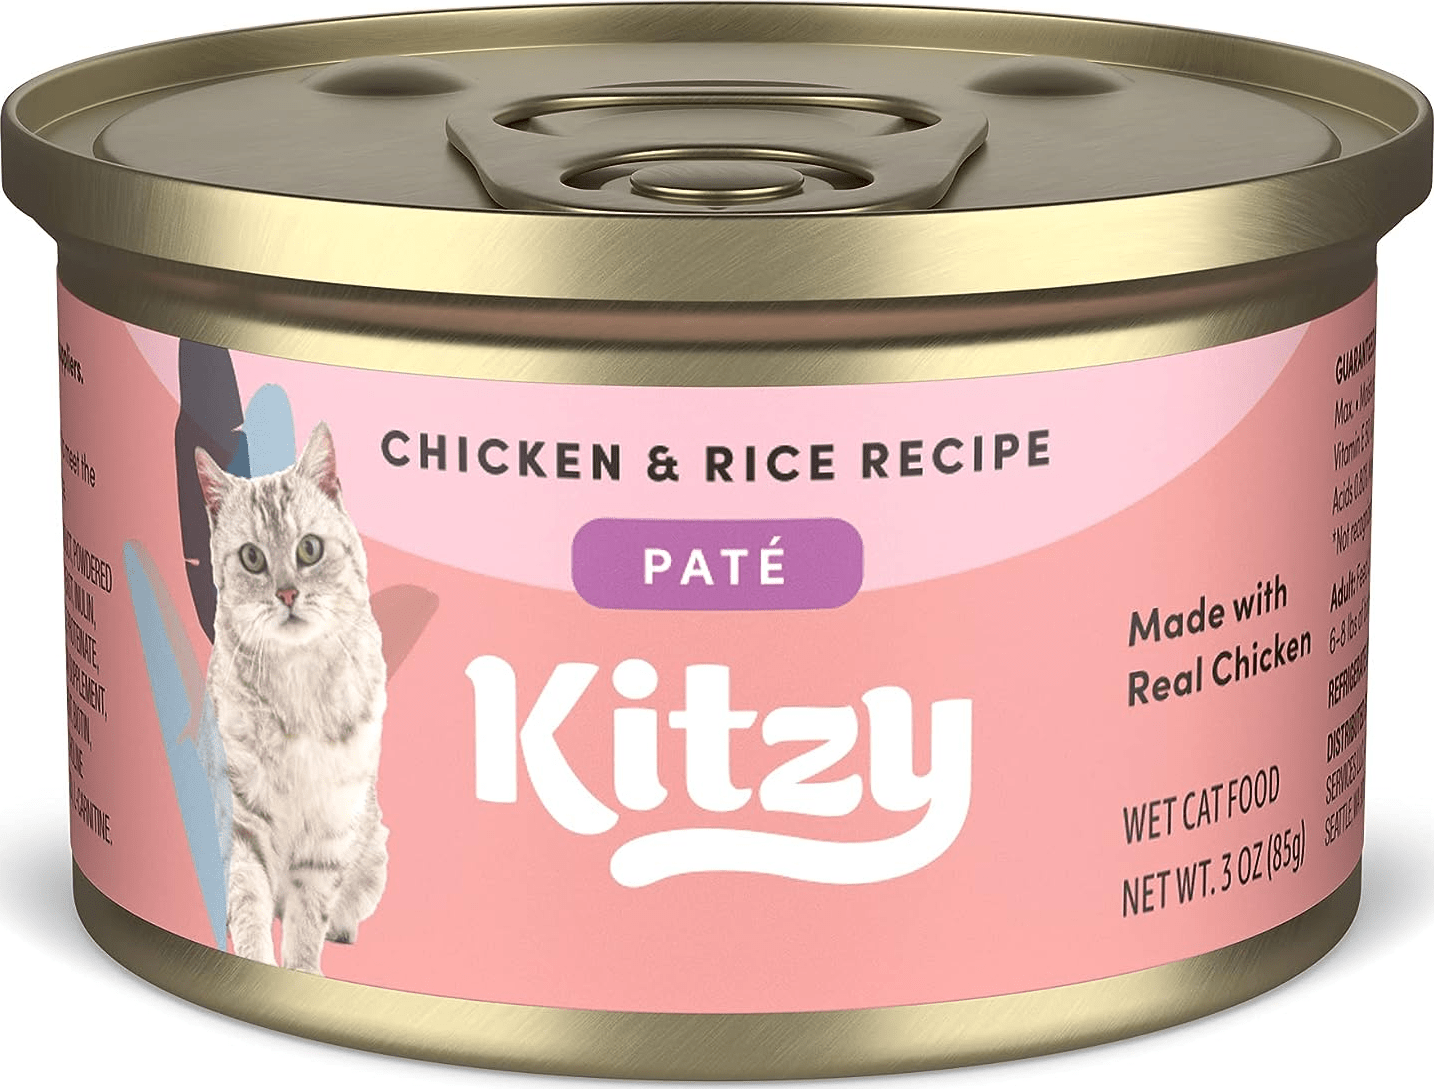 Kitzy Chicken & Rice Pate